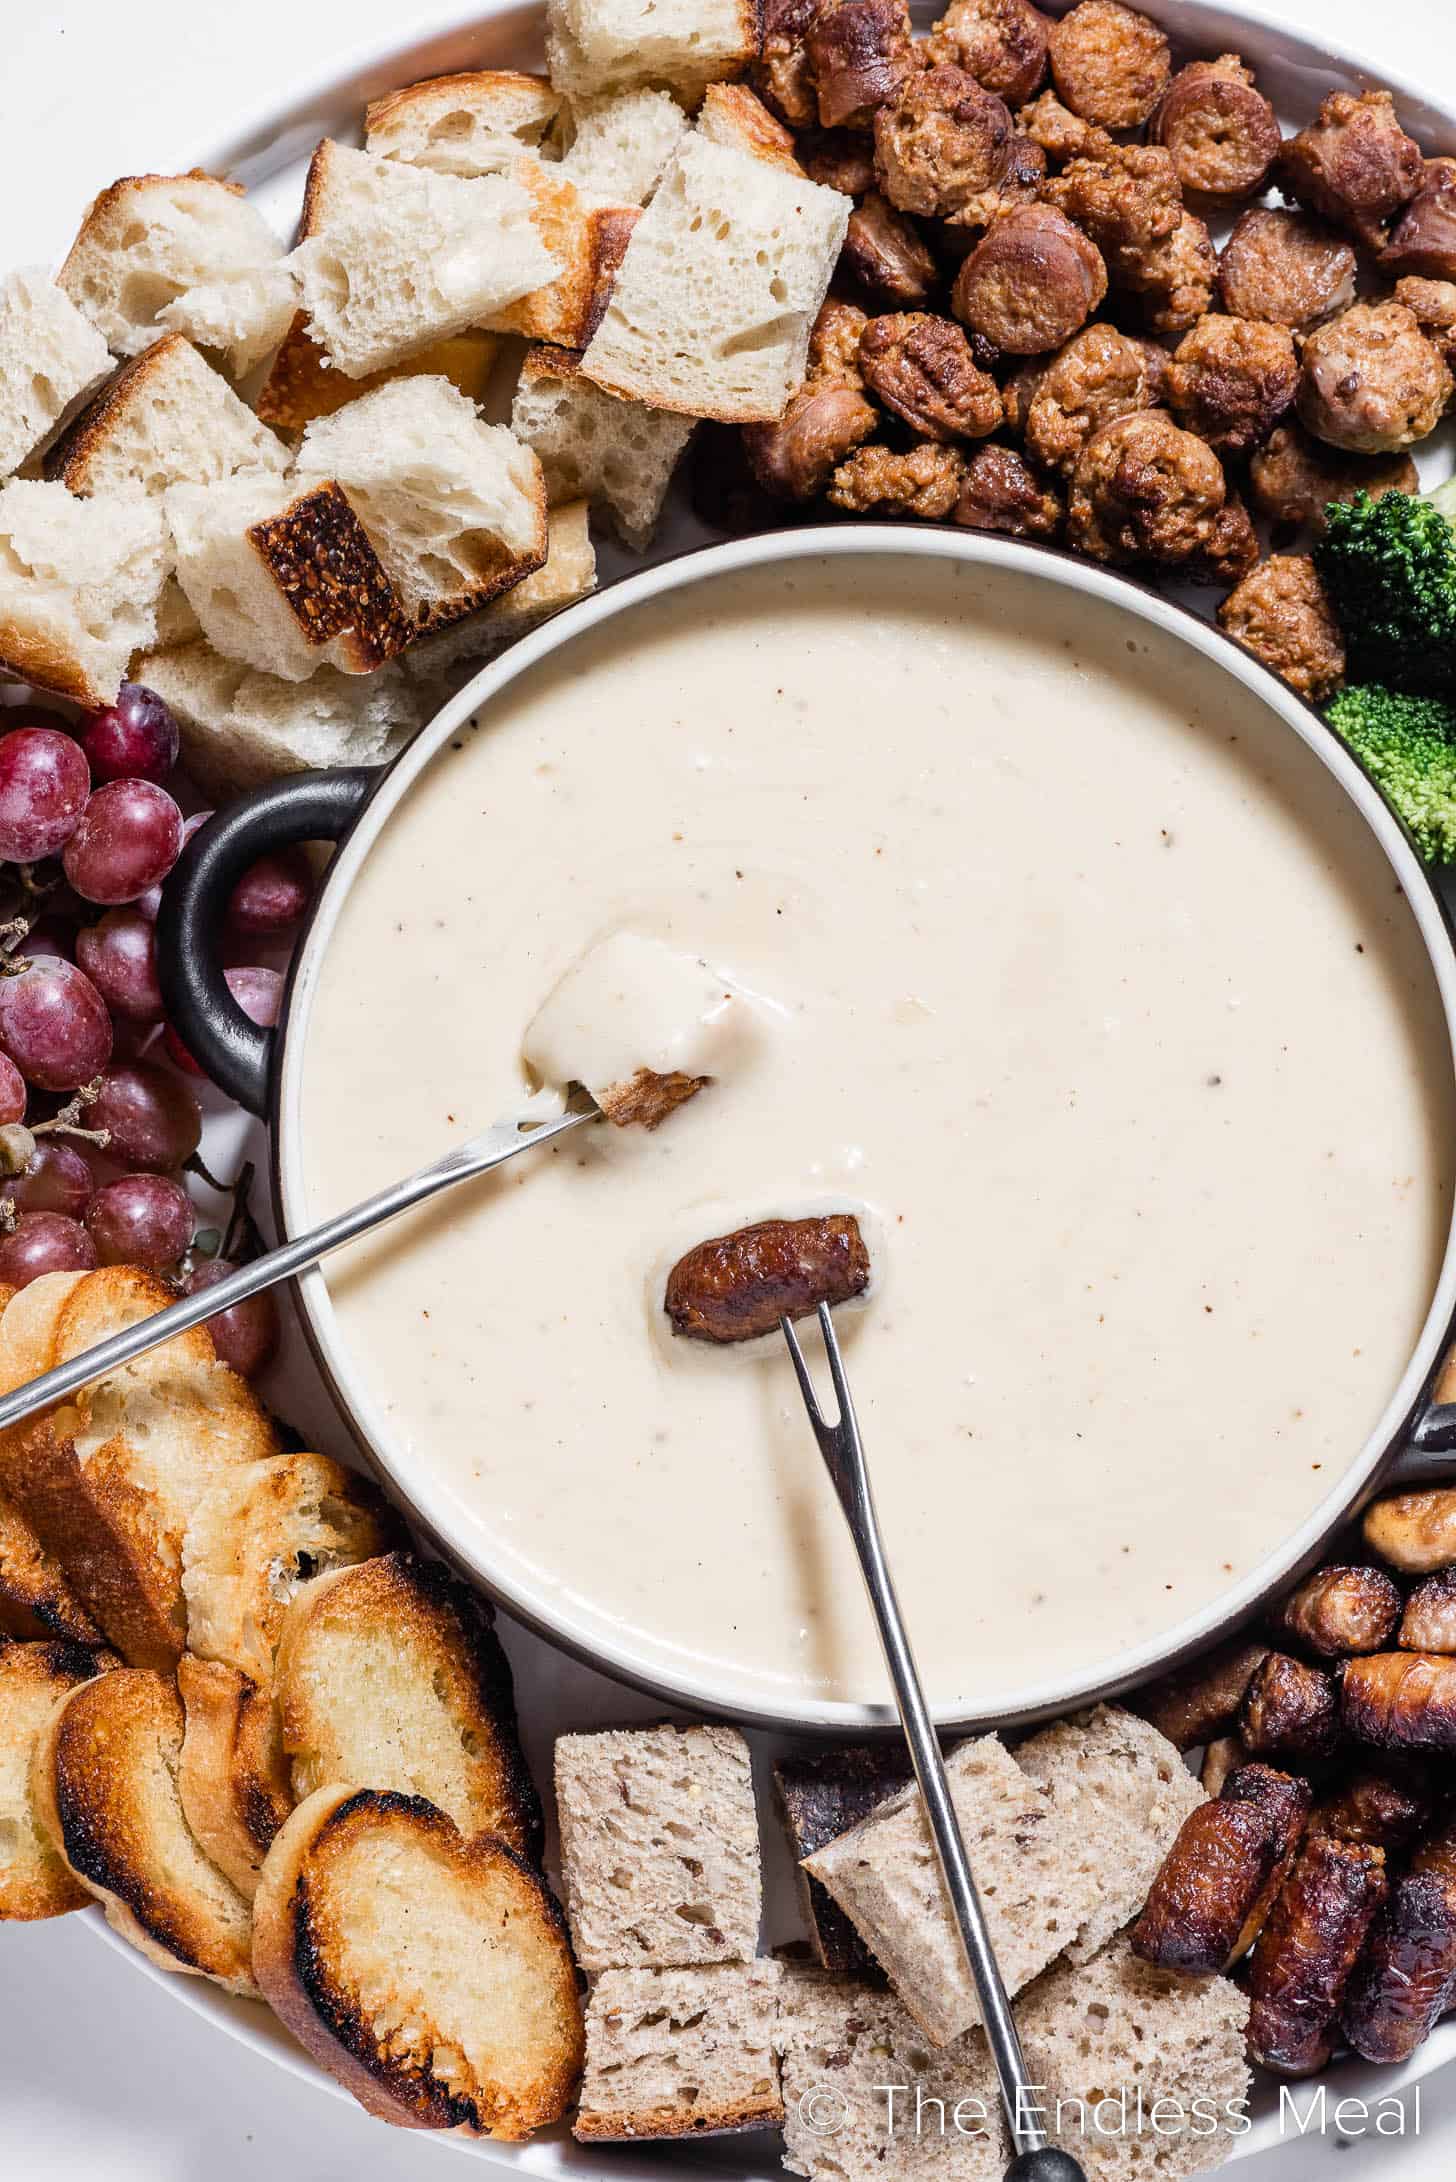 Gruyere Cheese Fondue in a pot surrounded by bread and dippers